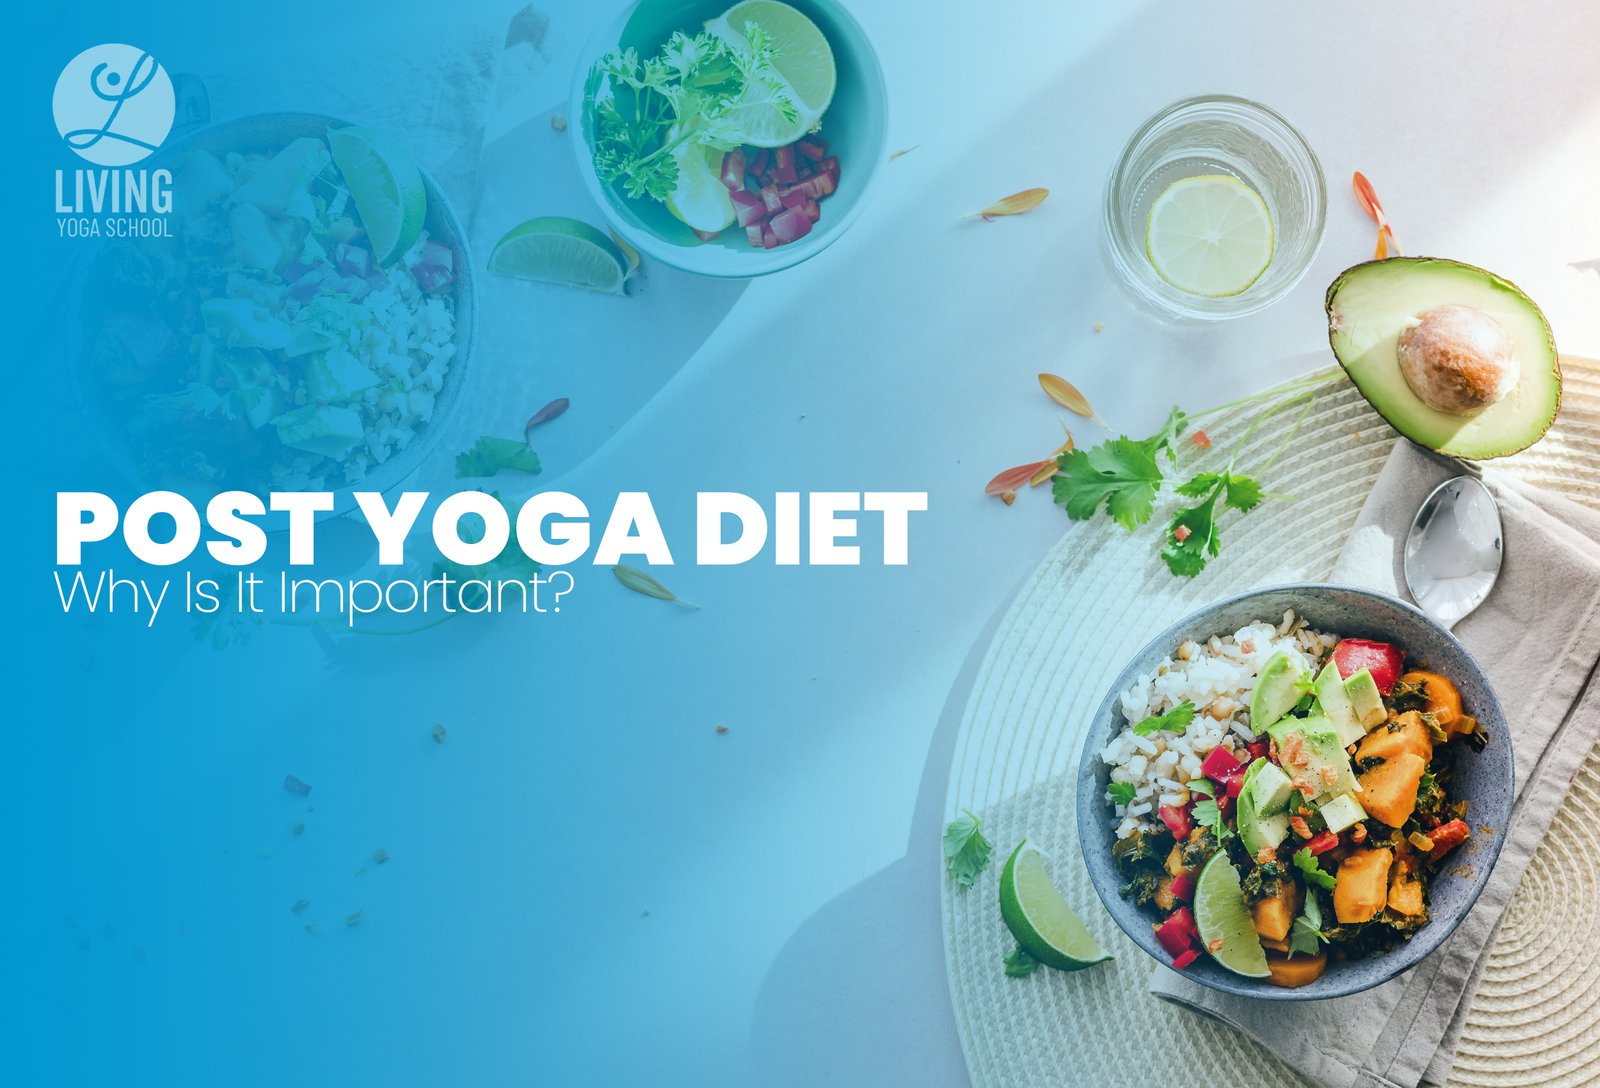 Post Yoga Diet – Why Is It Important